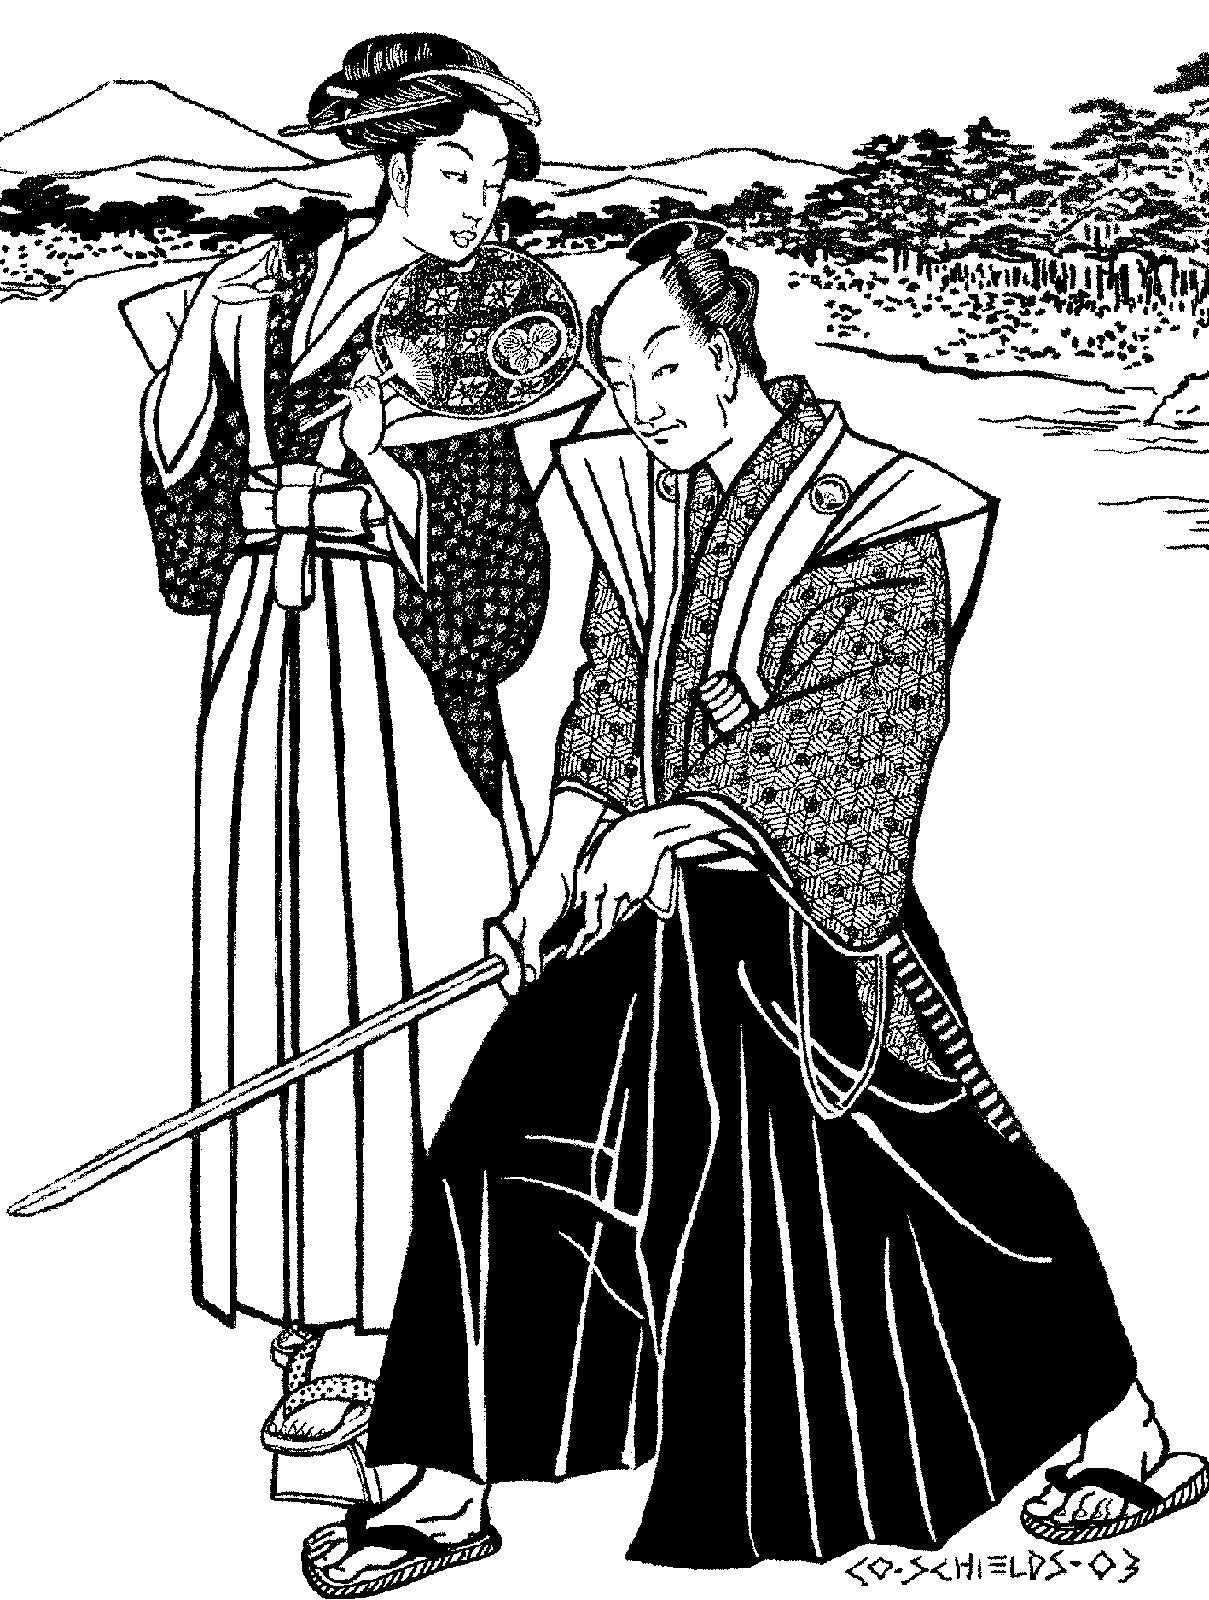 Black and white pen and ink drawing by artist Gretchen Schields.  Woman and man wearing traditional Hakama and Kataginu.  Man stands in foreground with a sword in his hands.  